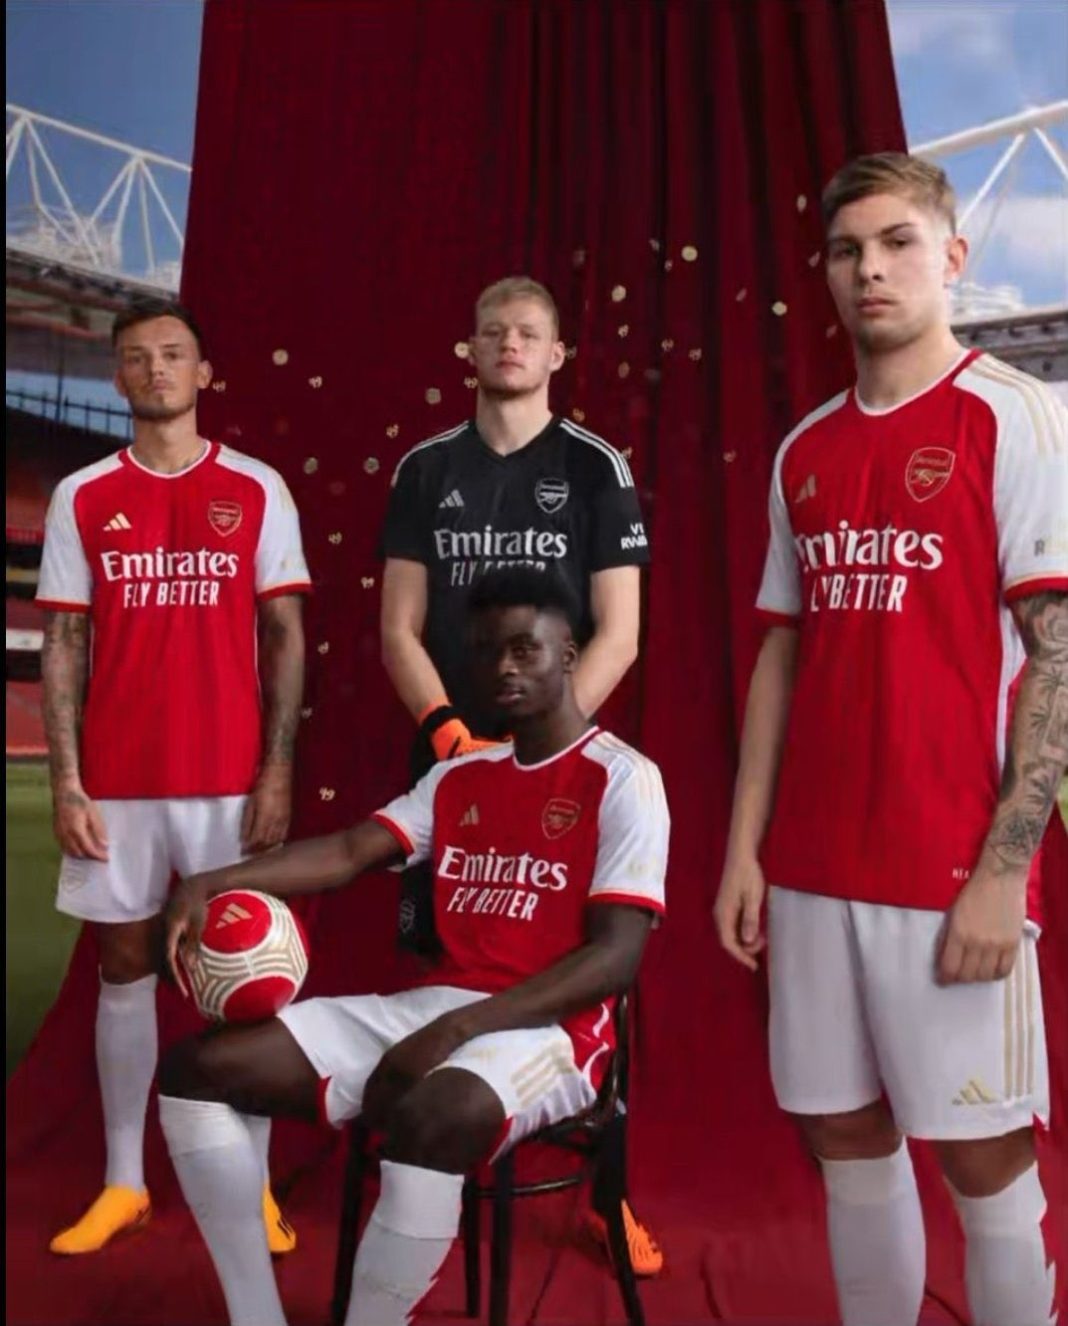 New Arsenal kit - Leaked picture of Ben White, Aaron Ramsdale, Emile Smith Rowe, and Bukayo Saka wearing the 2023/24 Arsenal home kit (Photo via afcstuff on Twitter)